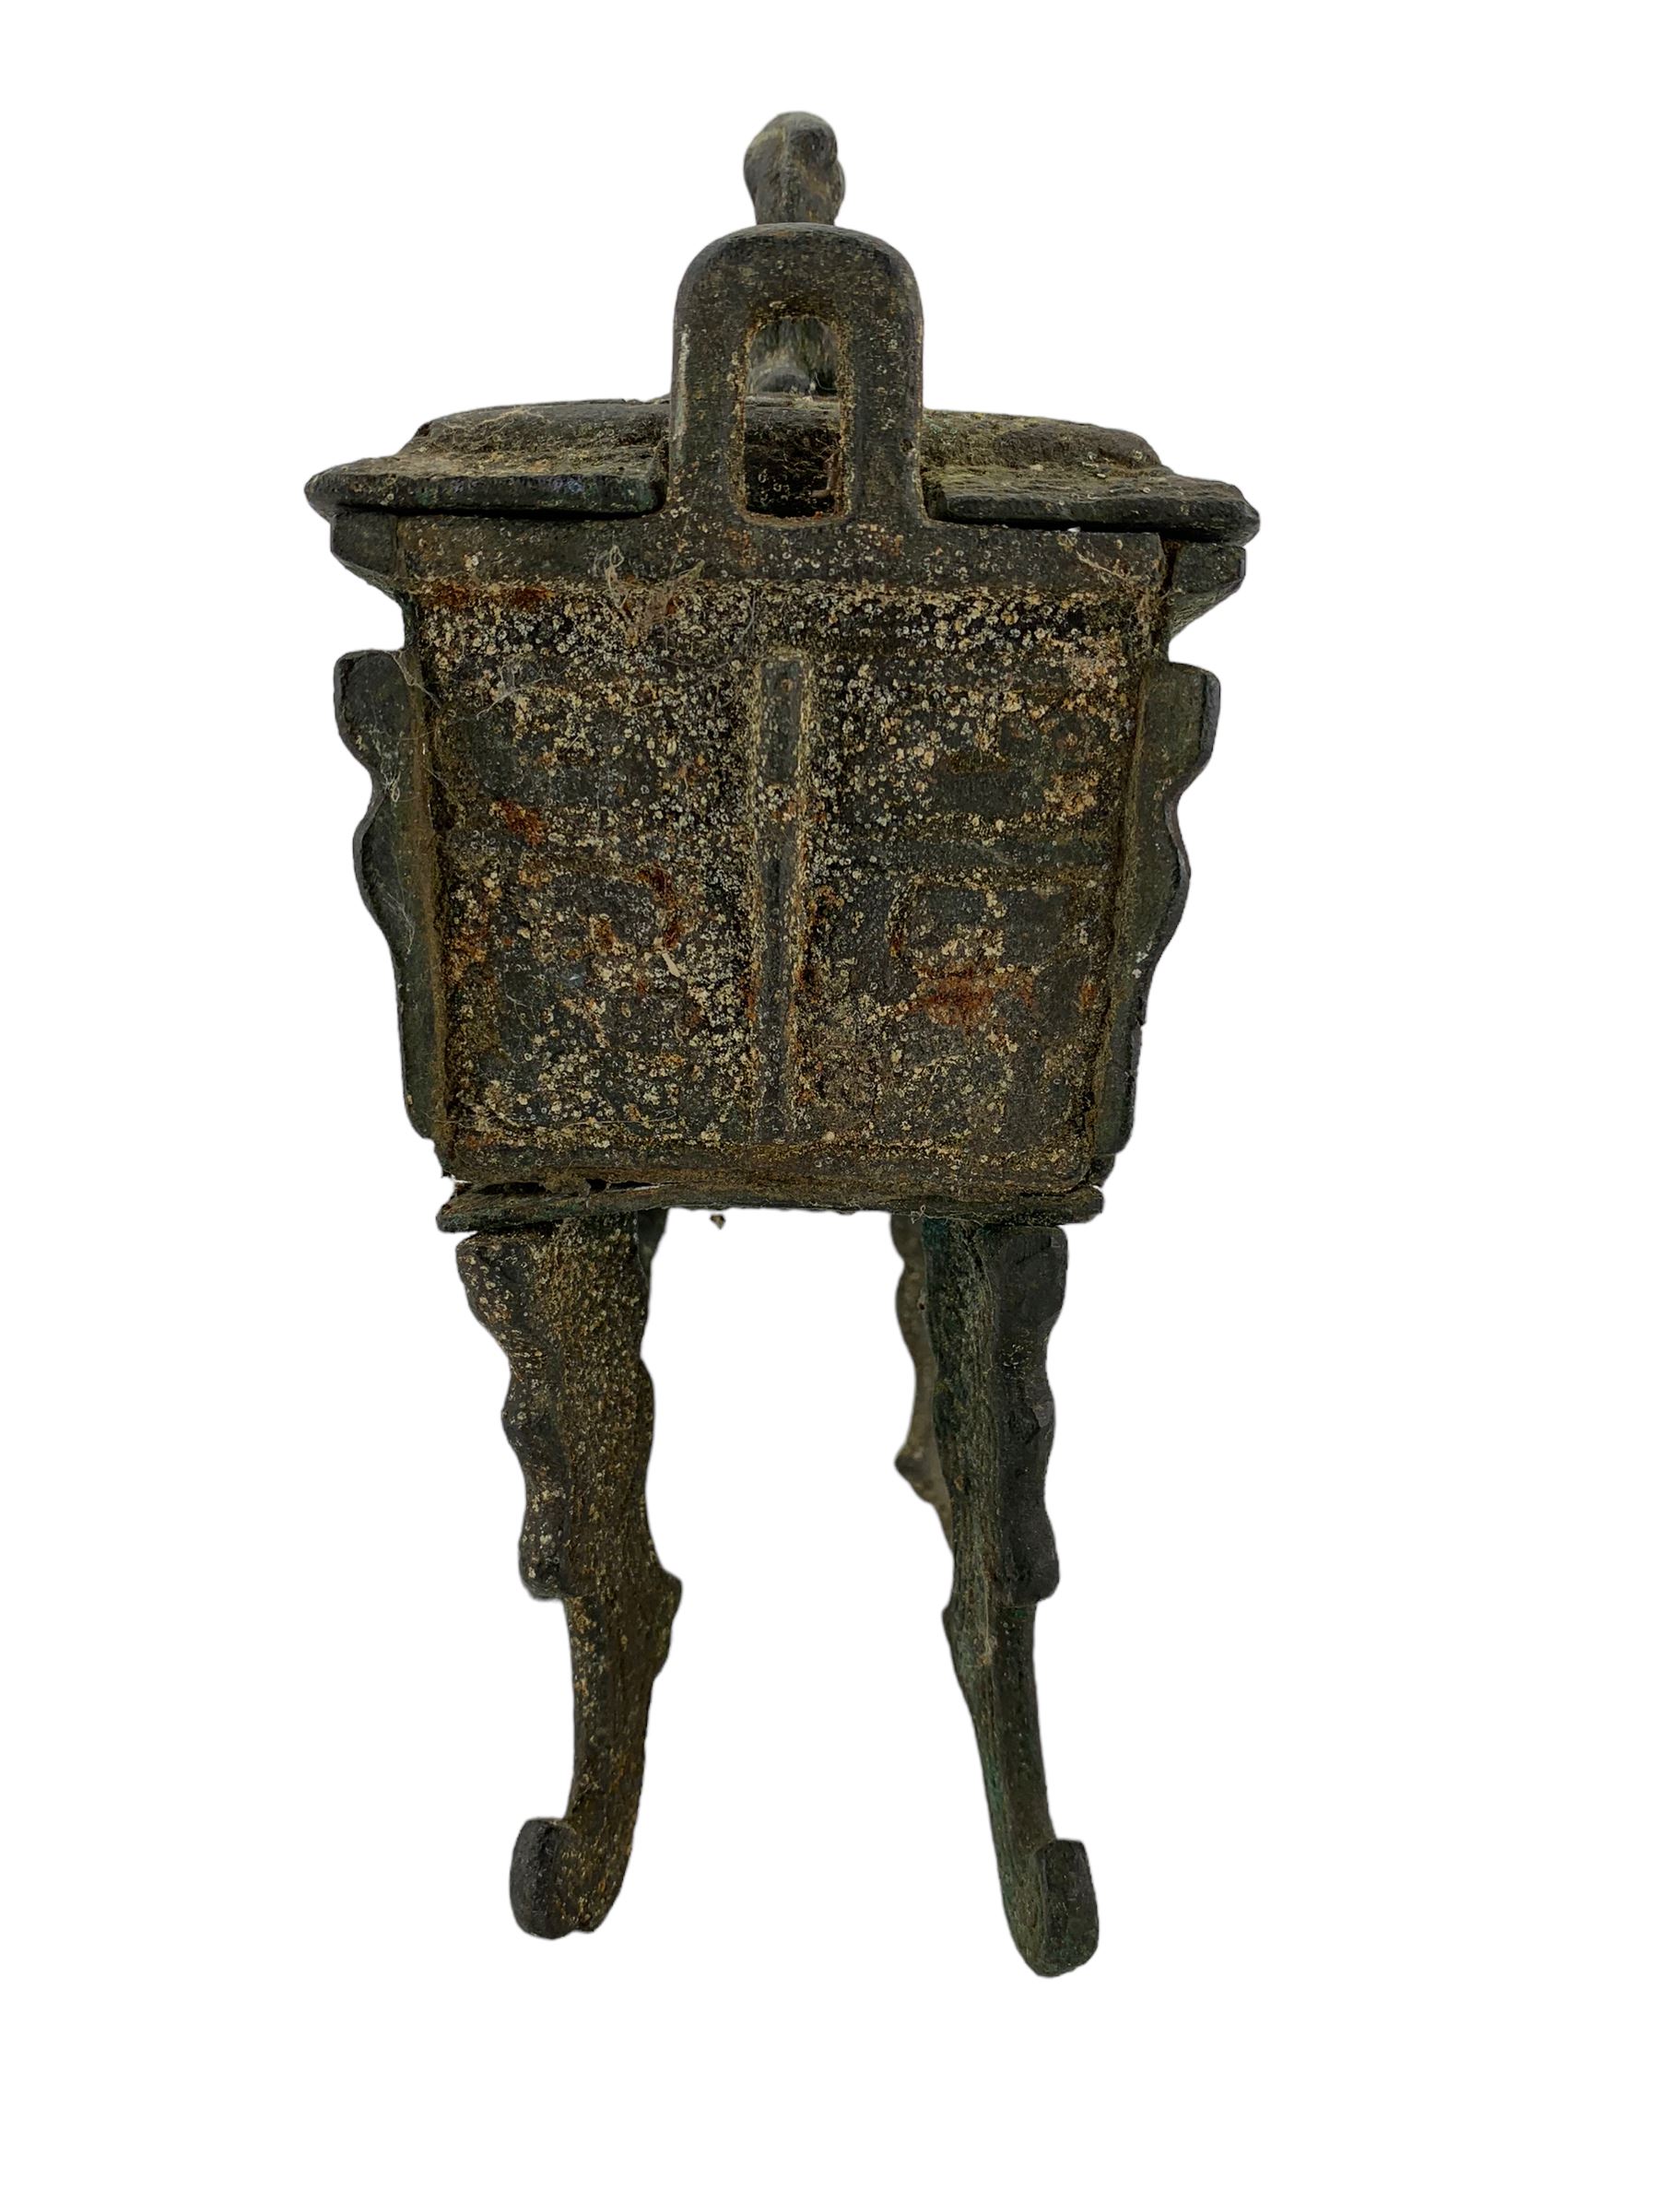 Chinese archaistic style censer of fang ding form - Image 4 of 7